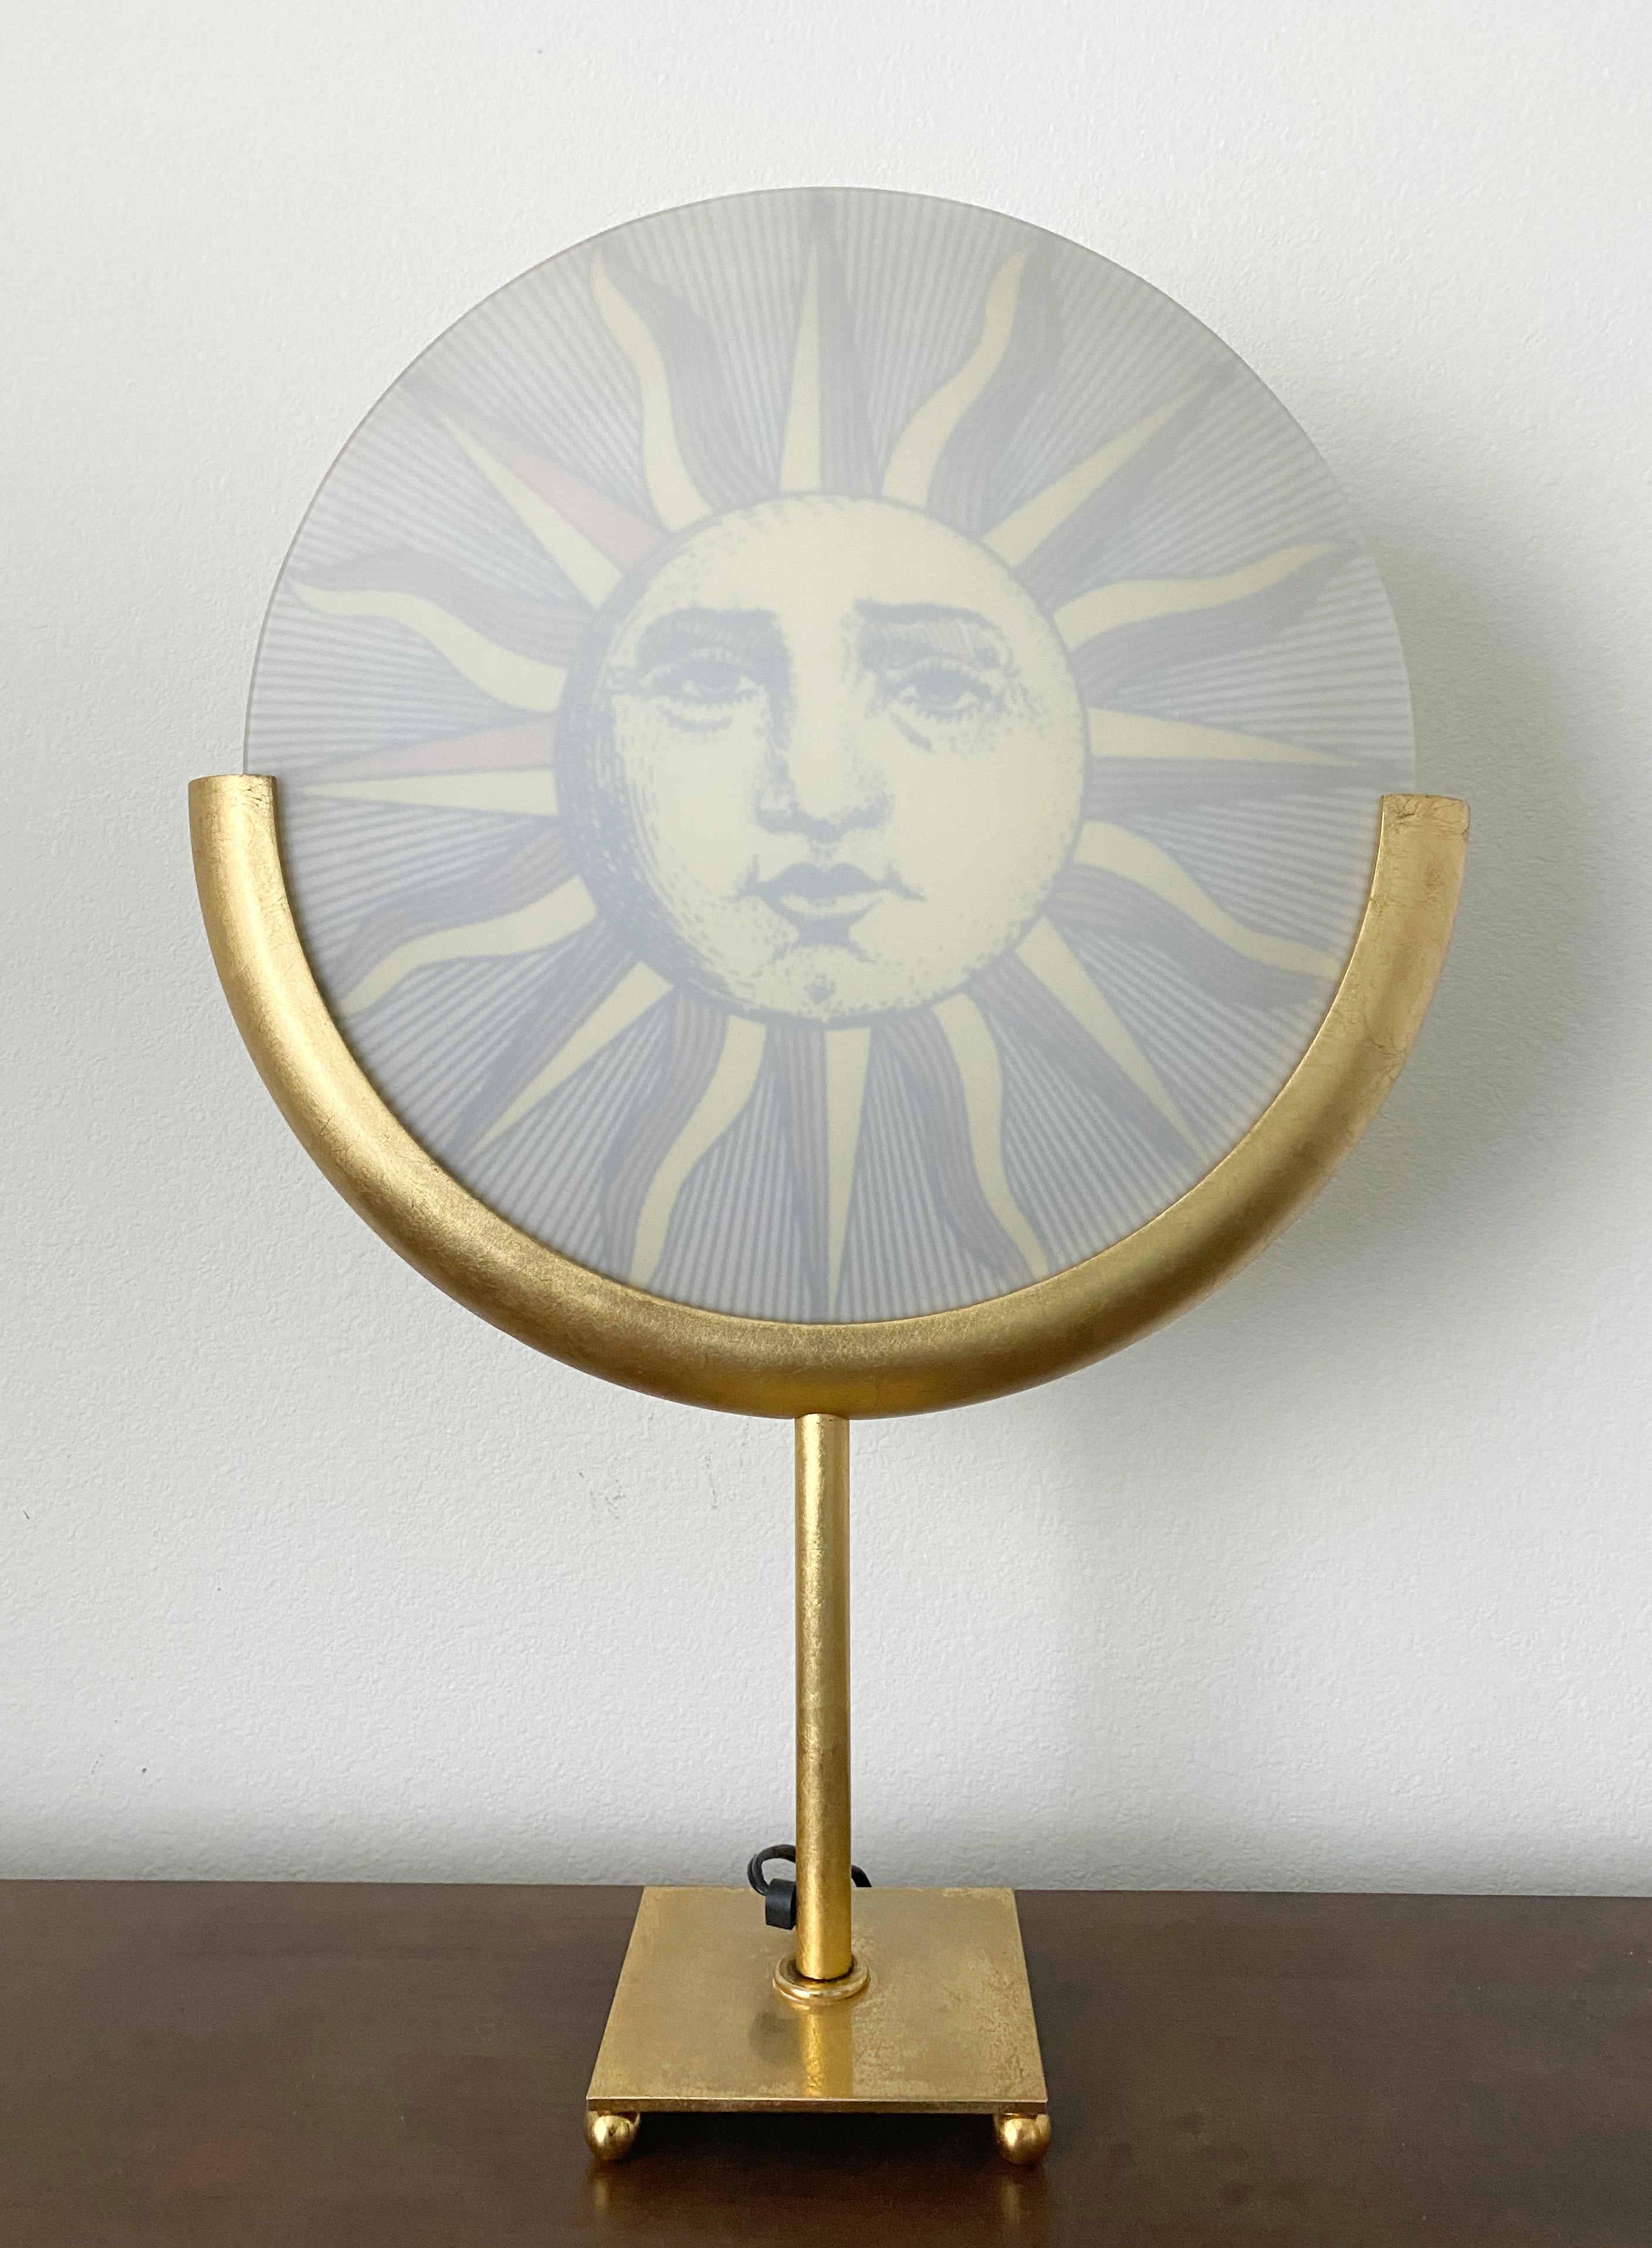 Vintage Italian table lamp in gilt wood and metal with reverse painted depictions of the Sun and Moon, designed by Piero Fornasetti, manufactured by Antonangelli Illuminazione in Milan Italy in the 1980s
Original labels on the lamp holder and the